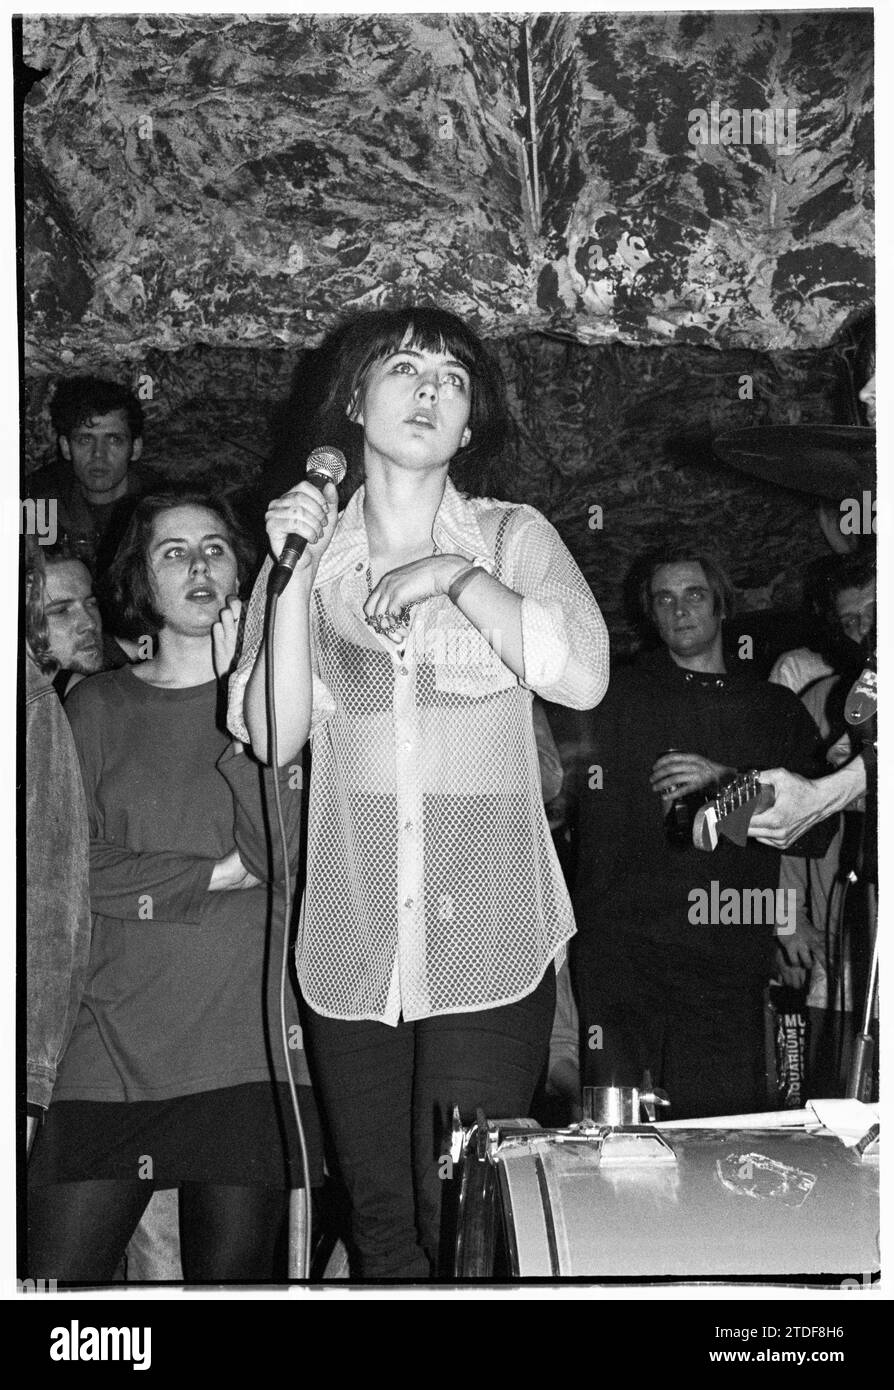 KATHLEEN HANNA, BIKINI KILL, NEWPORT TJS, 1993: Kathleen Hanna the singer of Bikini Kill playing at the Legendary TJs in Newport, Wales, UK on 8 March 1993. This Bikini Kill/Huggy Bear Tour came at the peak of the Riot Grrrl scene and was to promote the two bands combined 1993 album Yeah Yeah Yeah Yeah (Kill Rock Stars). The gig started with a music workshop for women only. Photo: Rob Watkins Stock Photo